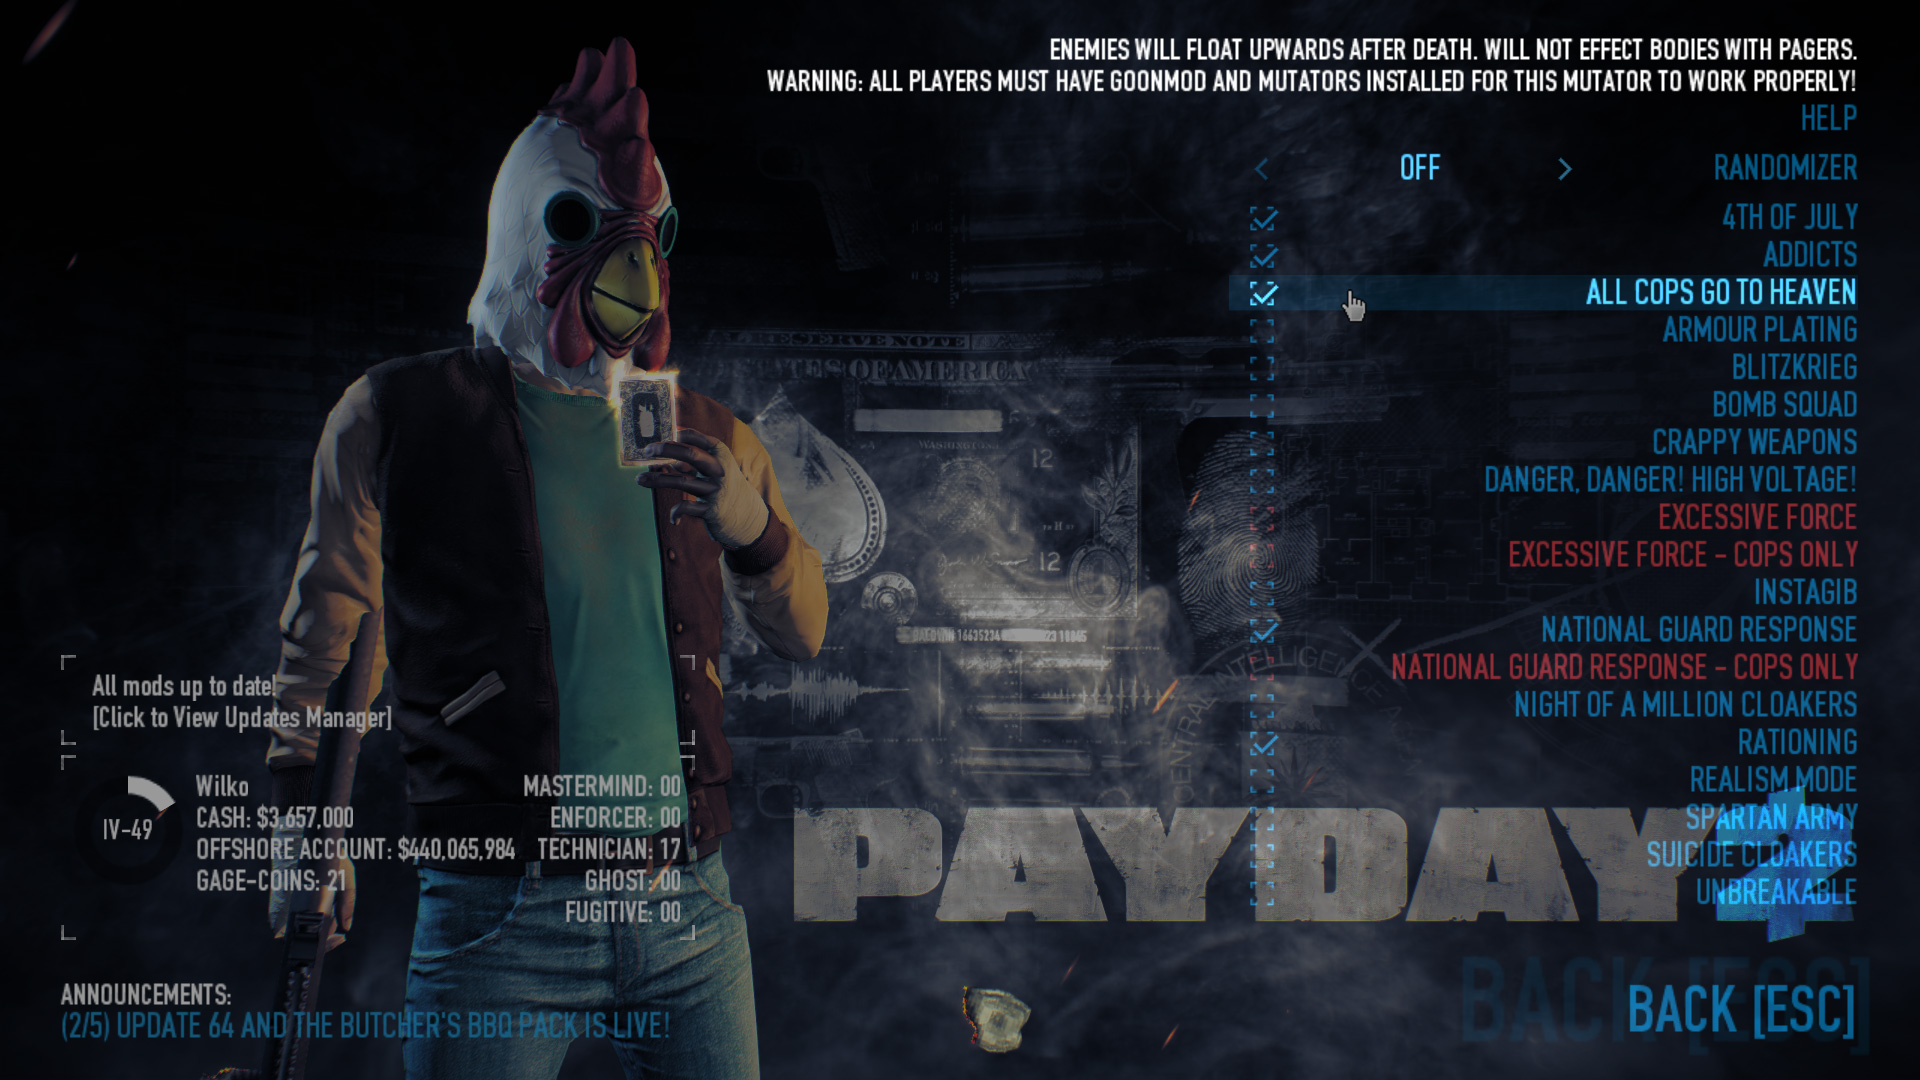 Goonmod for payday 2